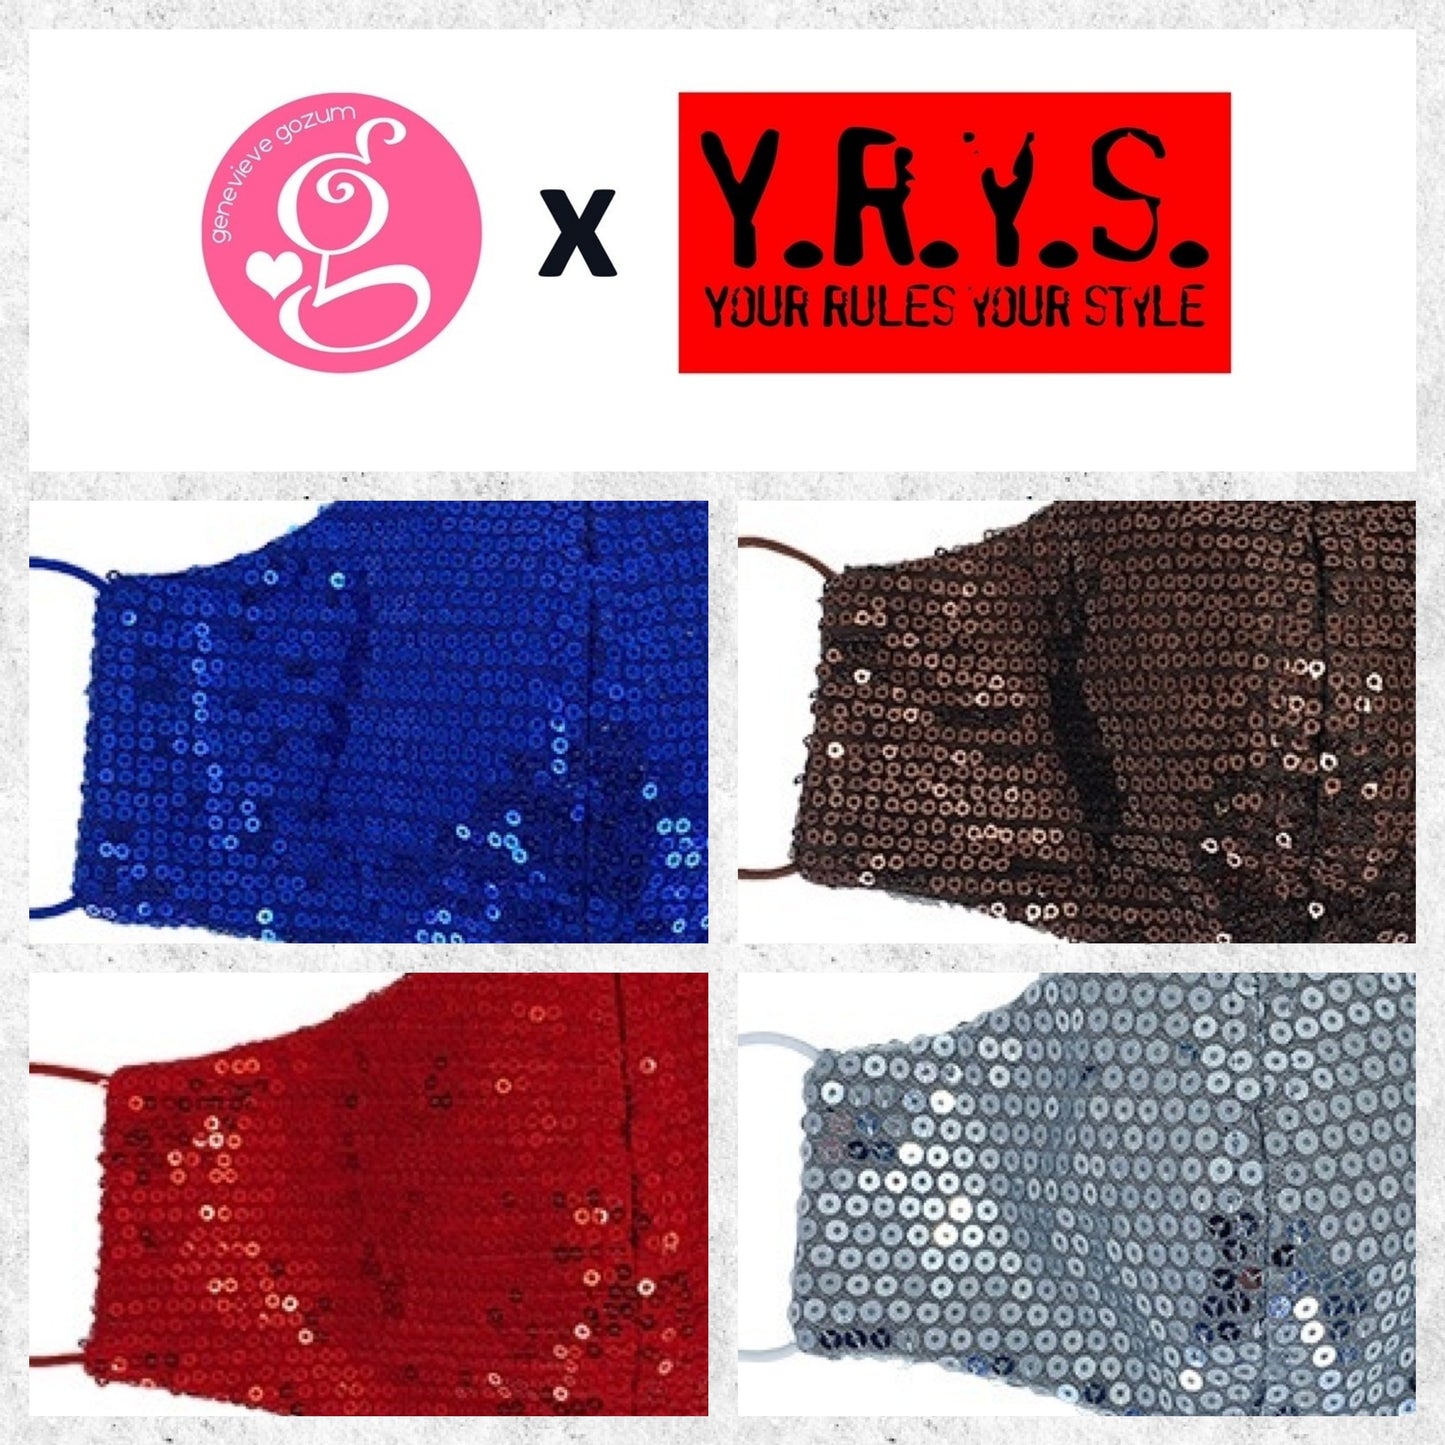 ALL THAT GLITTERS SEQUIN WITH FILTER POCKET FACE MASK by YRYS